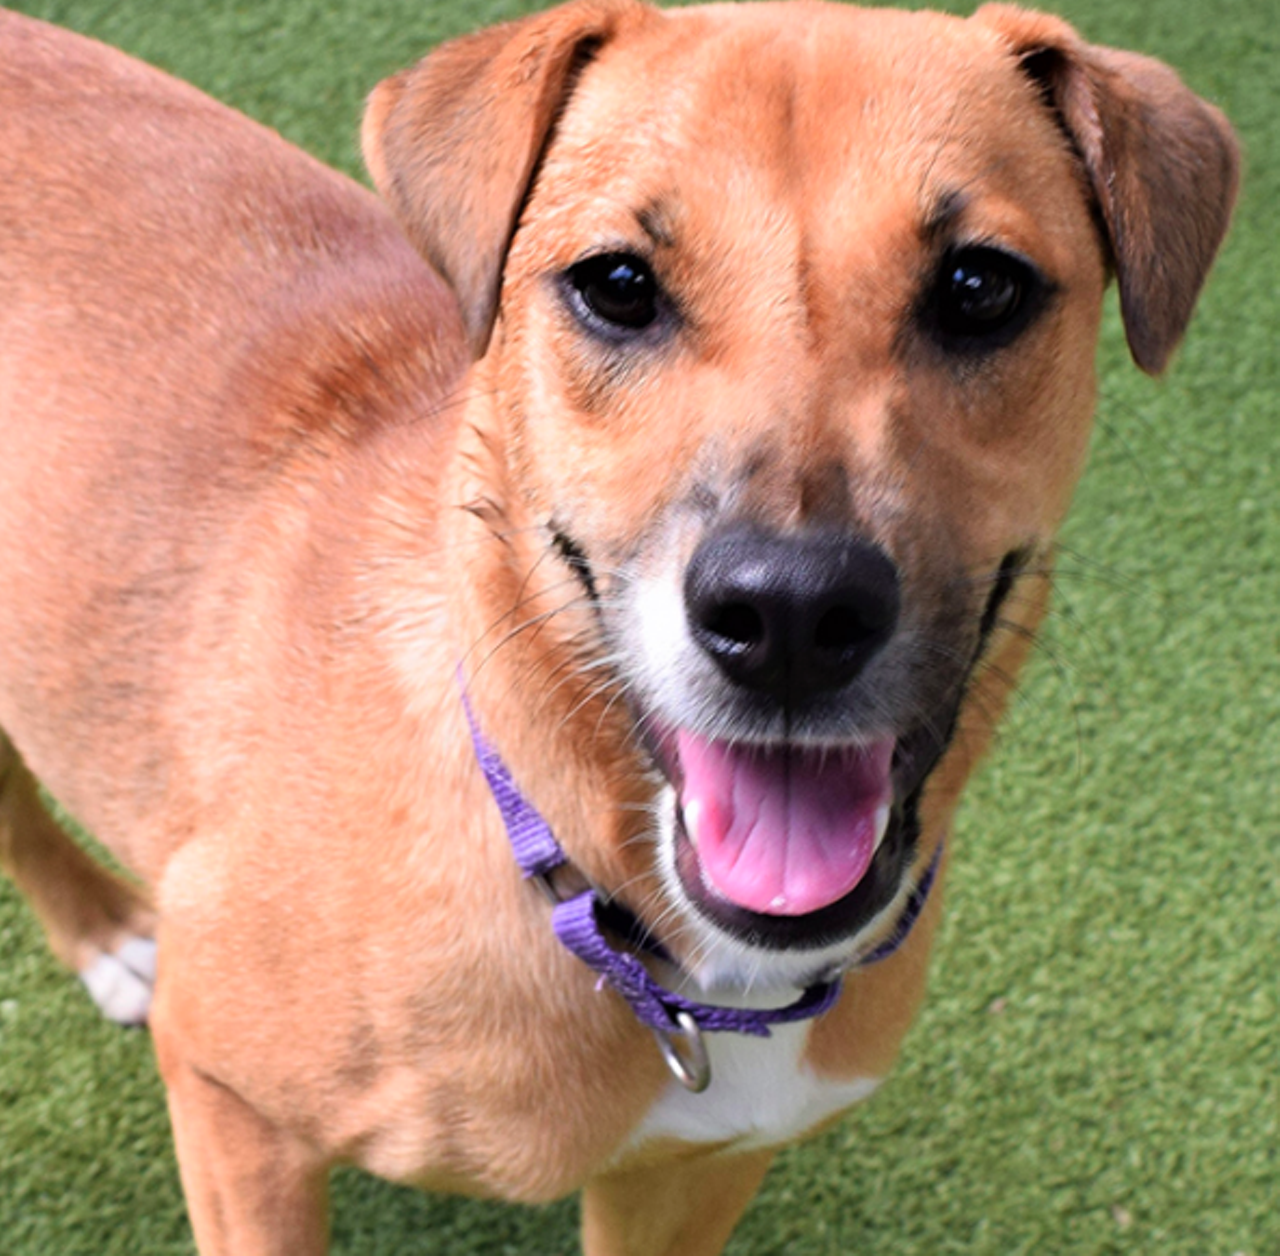 Felicity
"Hi, I’m Felicity! I’m a fun loving girl with a heart of gold. I’m always excited to meet everyone! I’ll would love a home where I can have lots of toys and exercise to keep me occupied, so I can get all of my energy out. I would be the best family dog and can’t wait to join yours!"